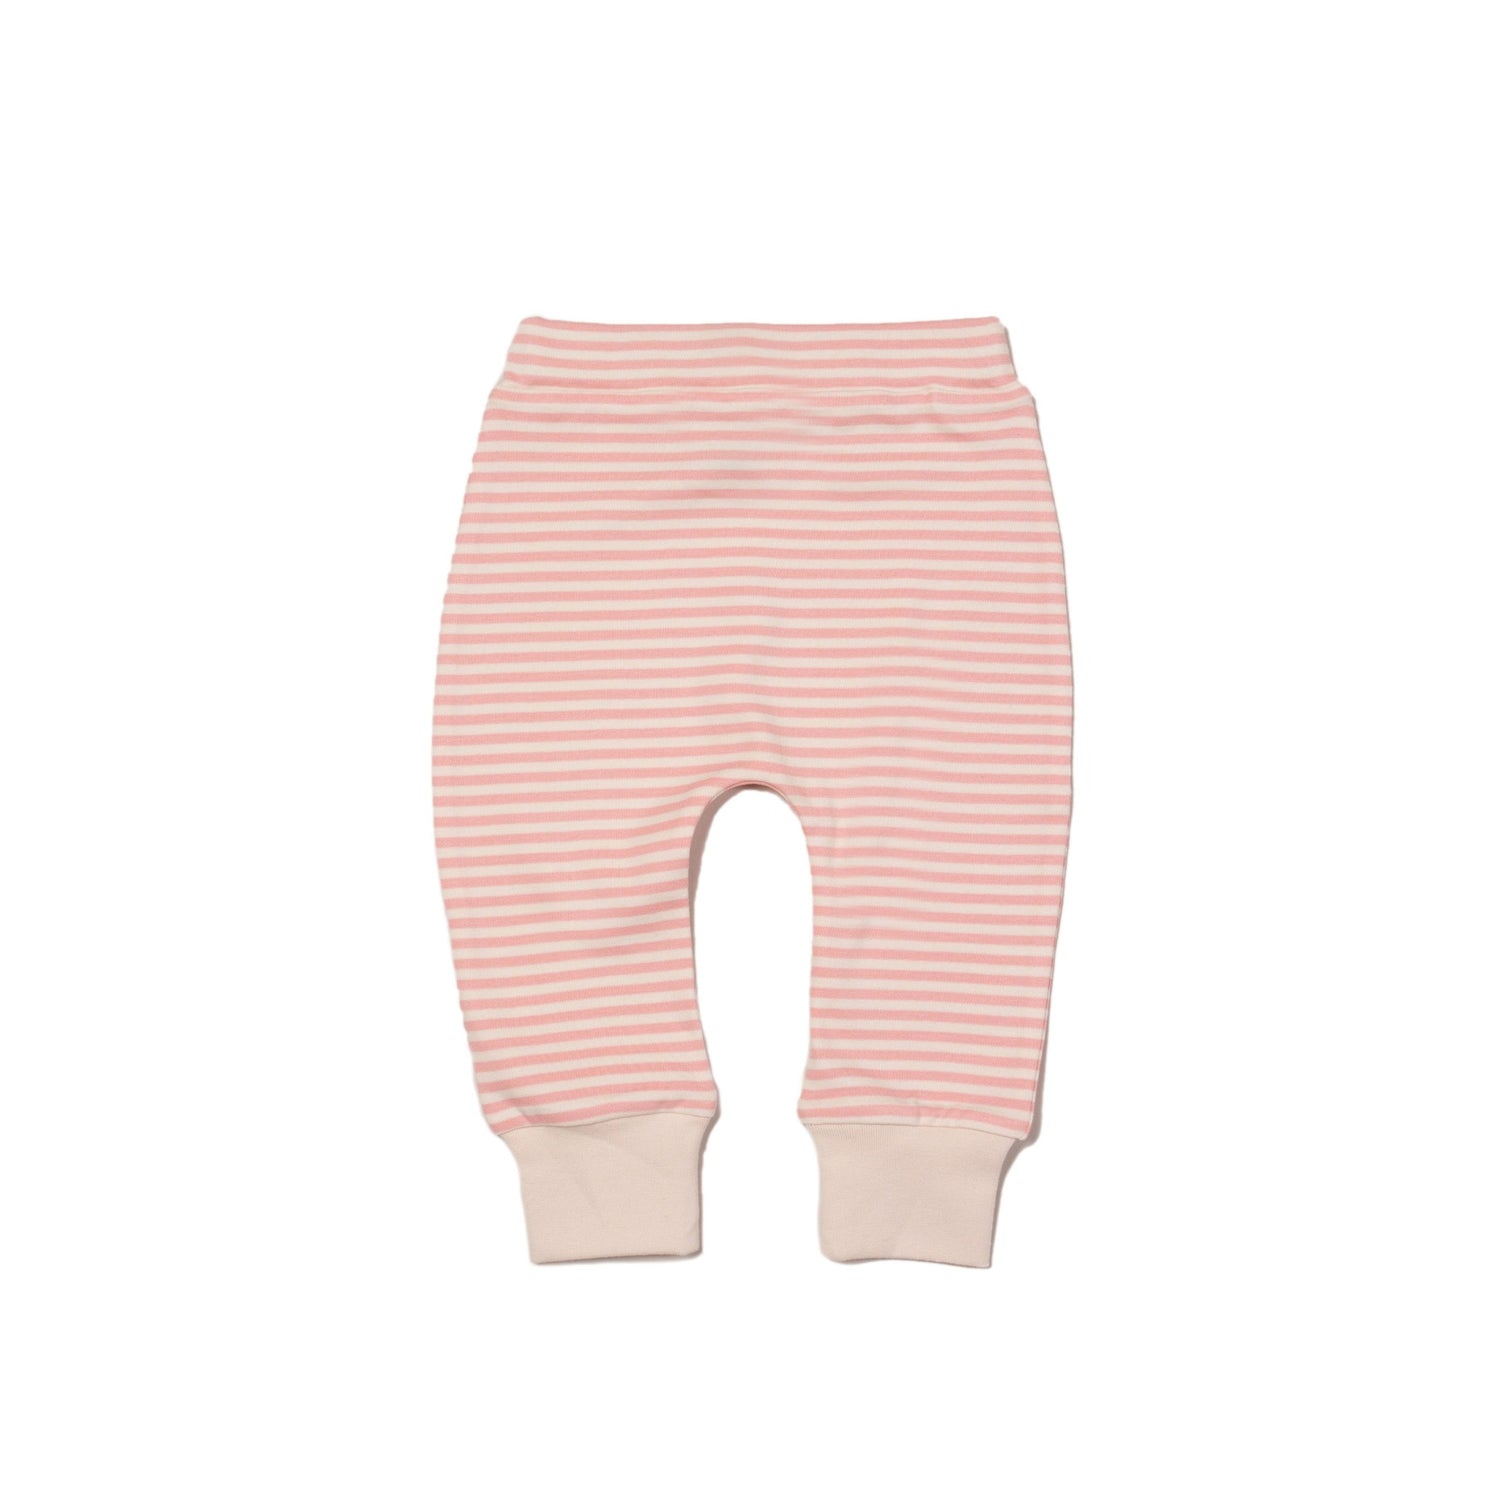 Quince flowers playset stripy joggers